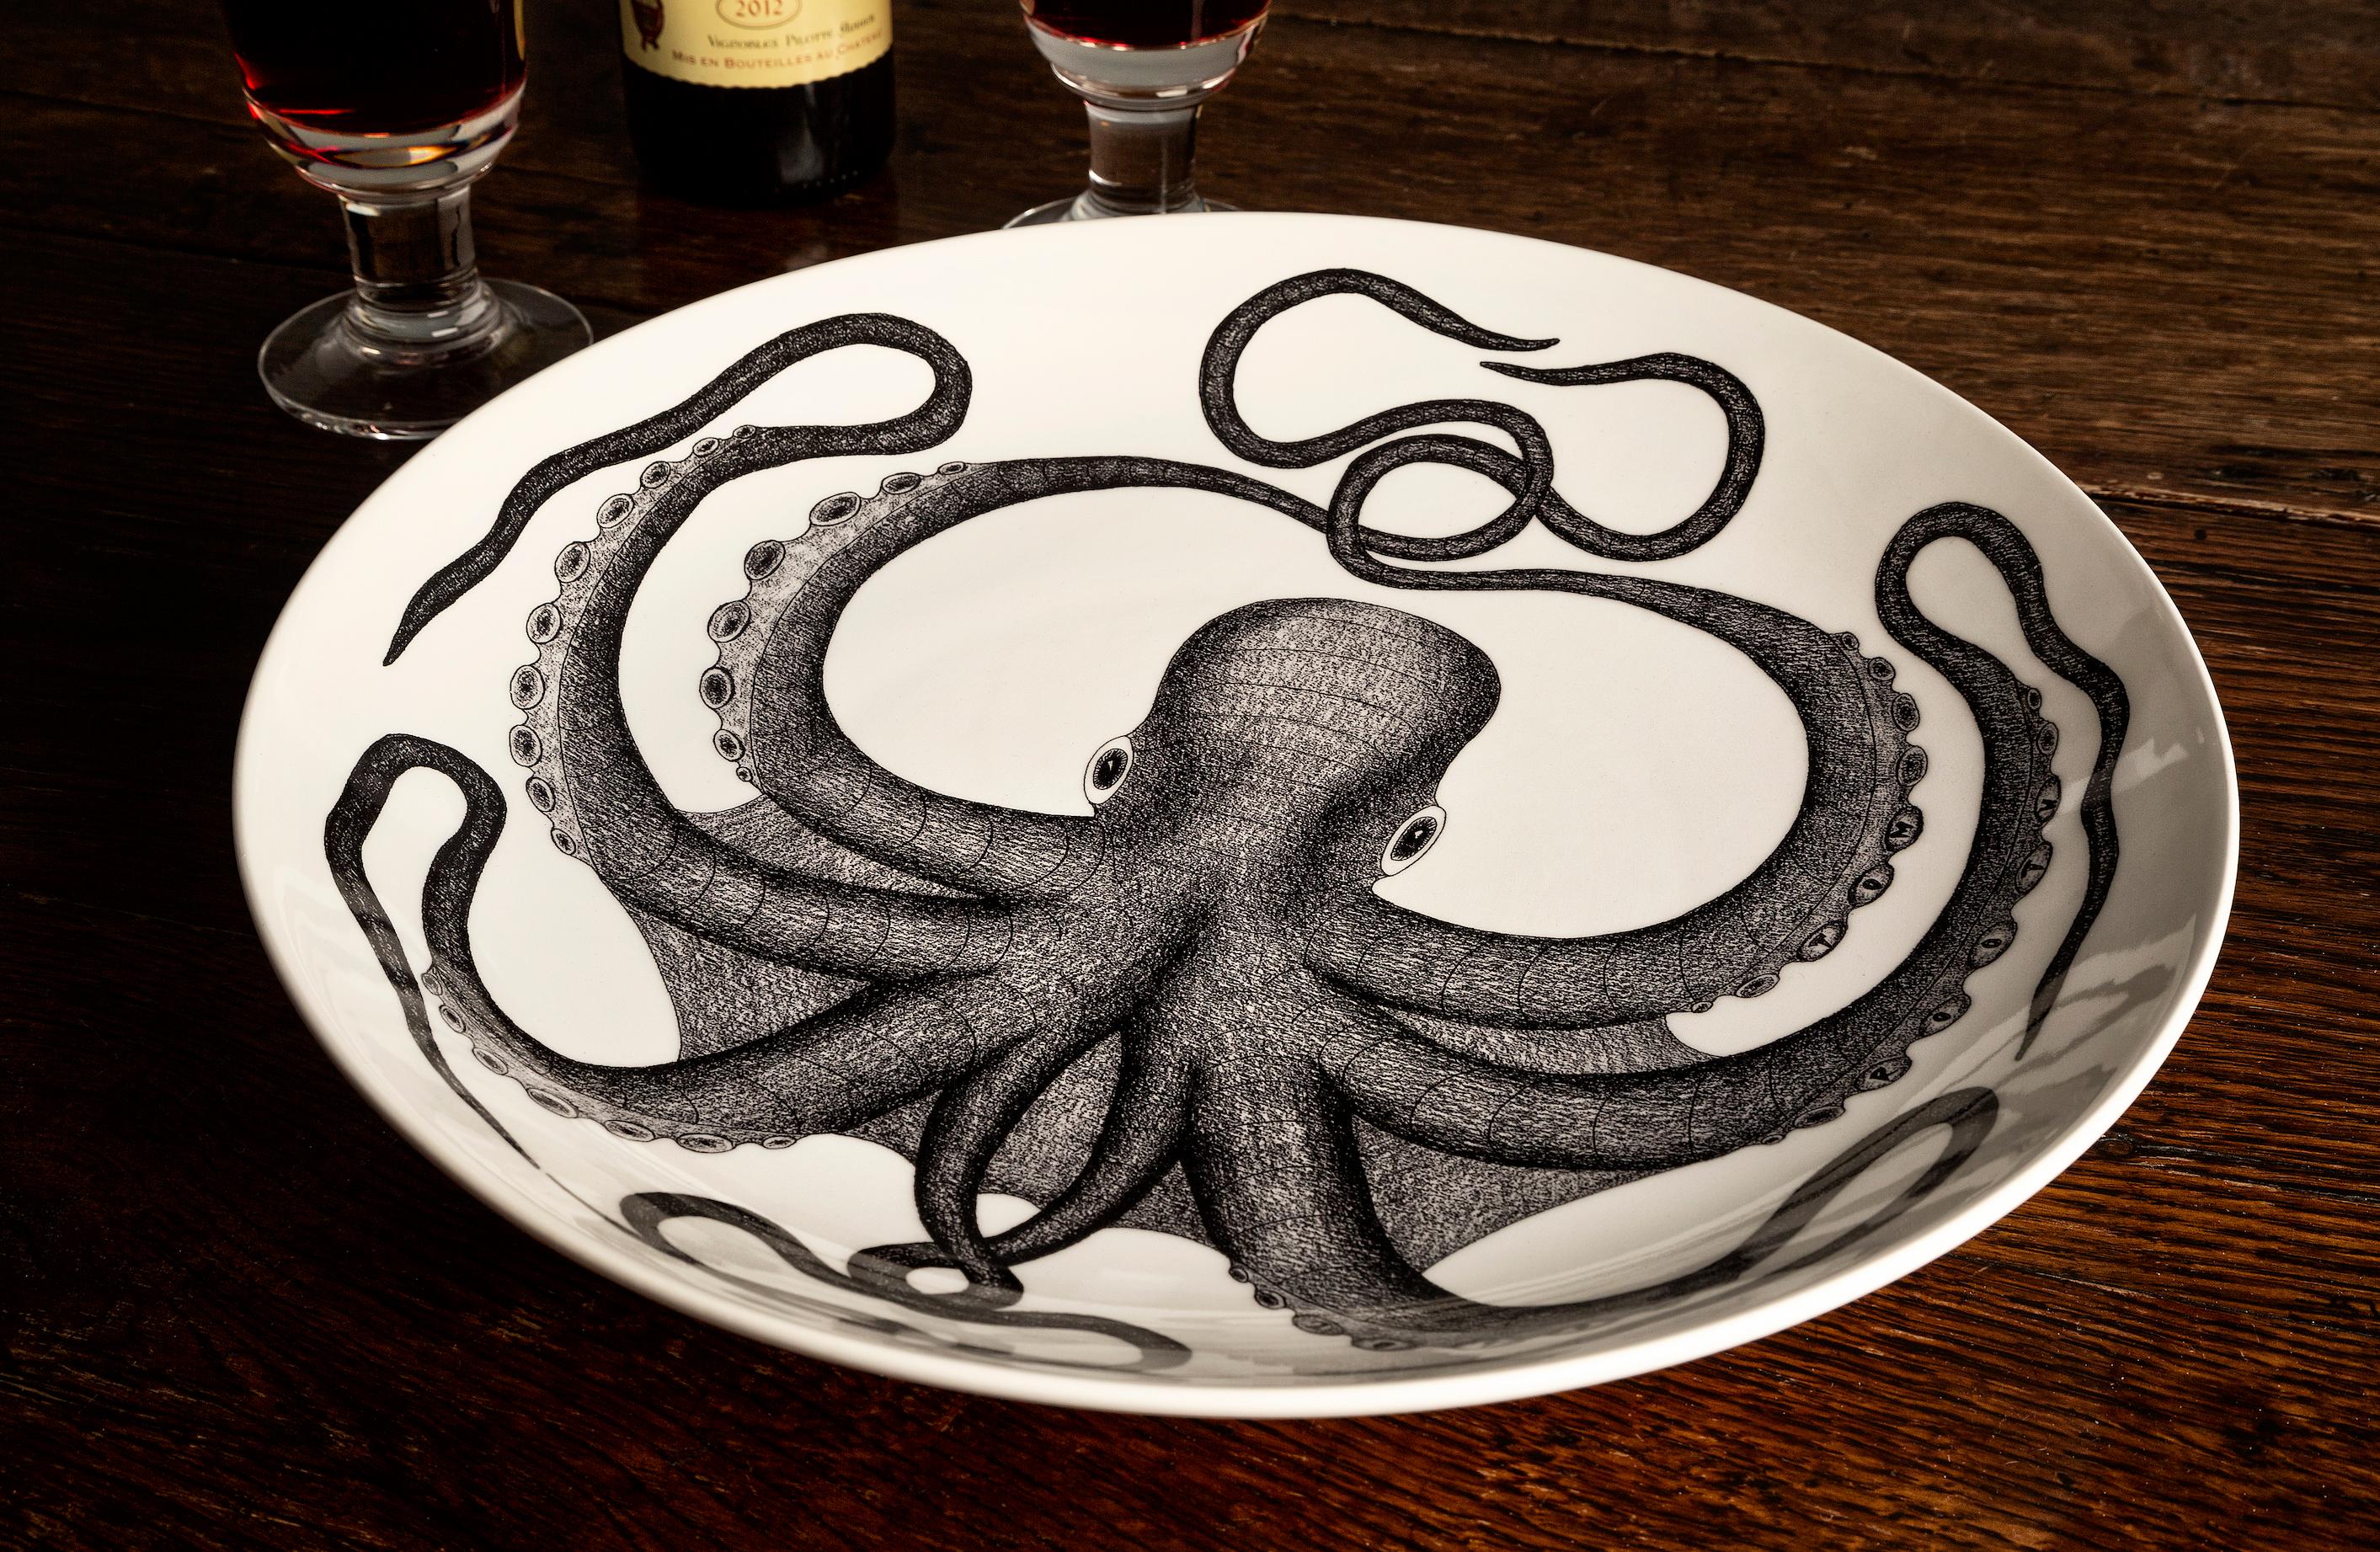 Octoplate - Realist Art by Tom Rooth